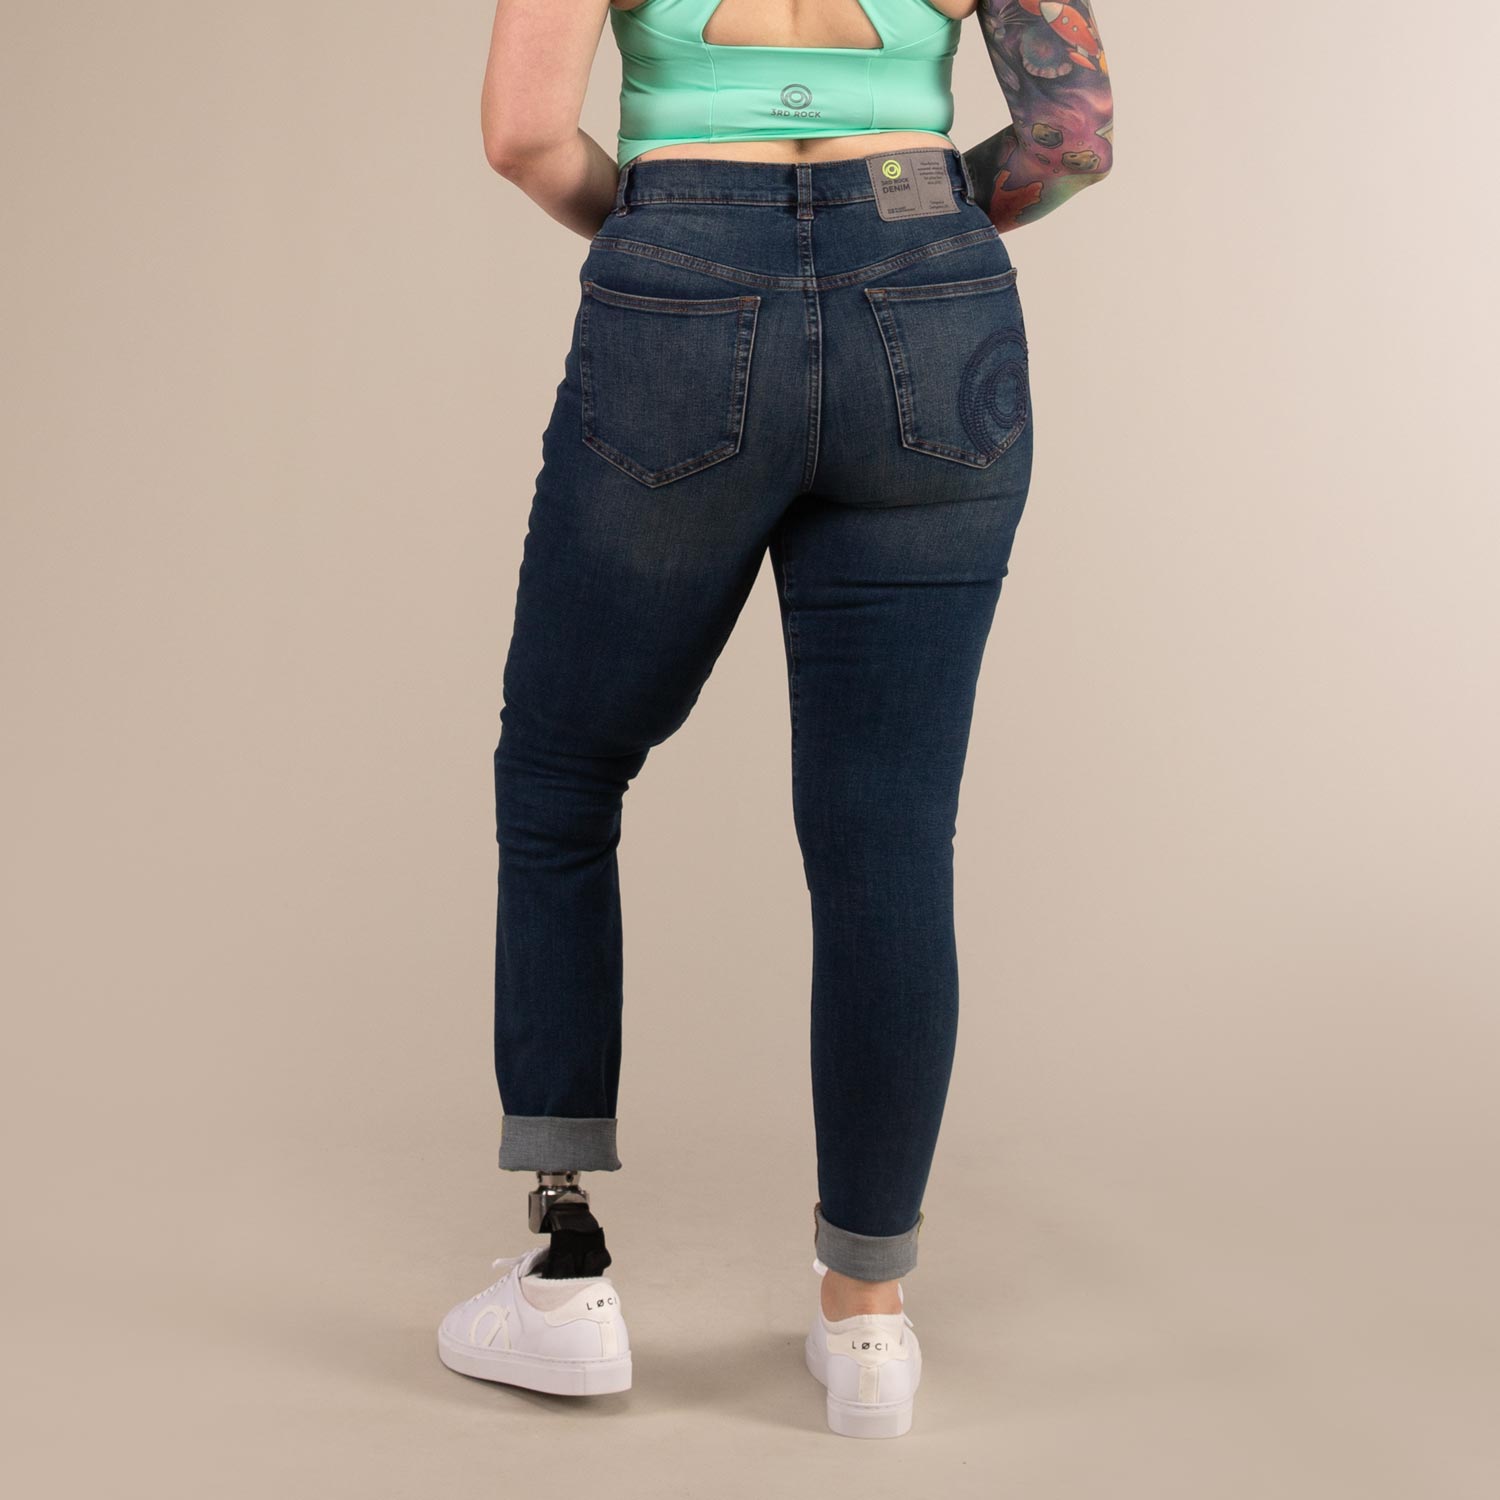 MARPLE JEANS | Skinny Cut Stretchy Sustainable Jeans | 3RD ROCK Clothing -  Laura is 5ft 6 with a 31" waist, 43" hips and wears a size 32/RL F